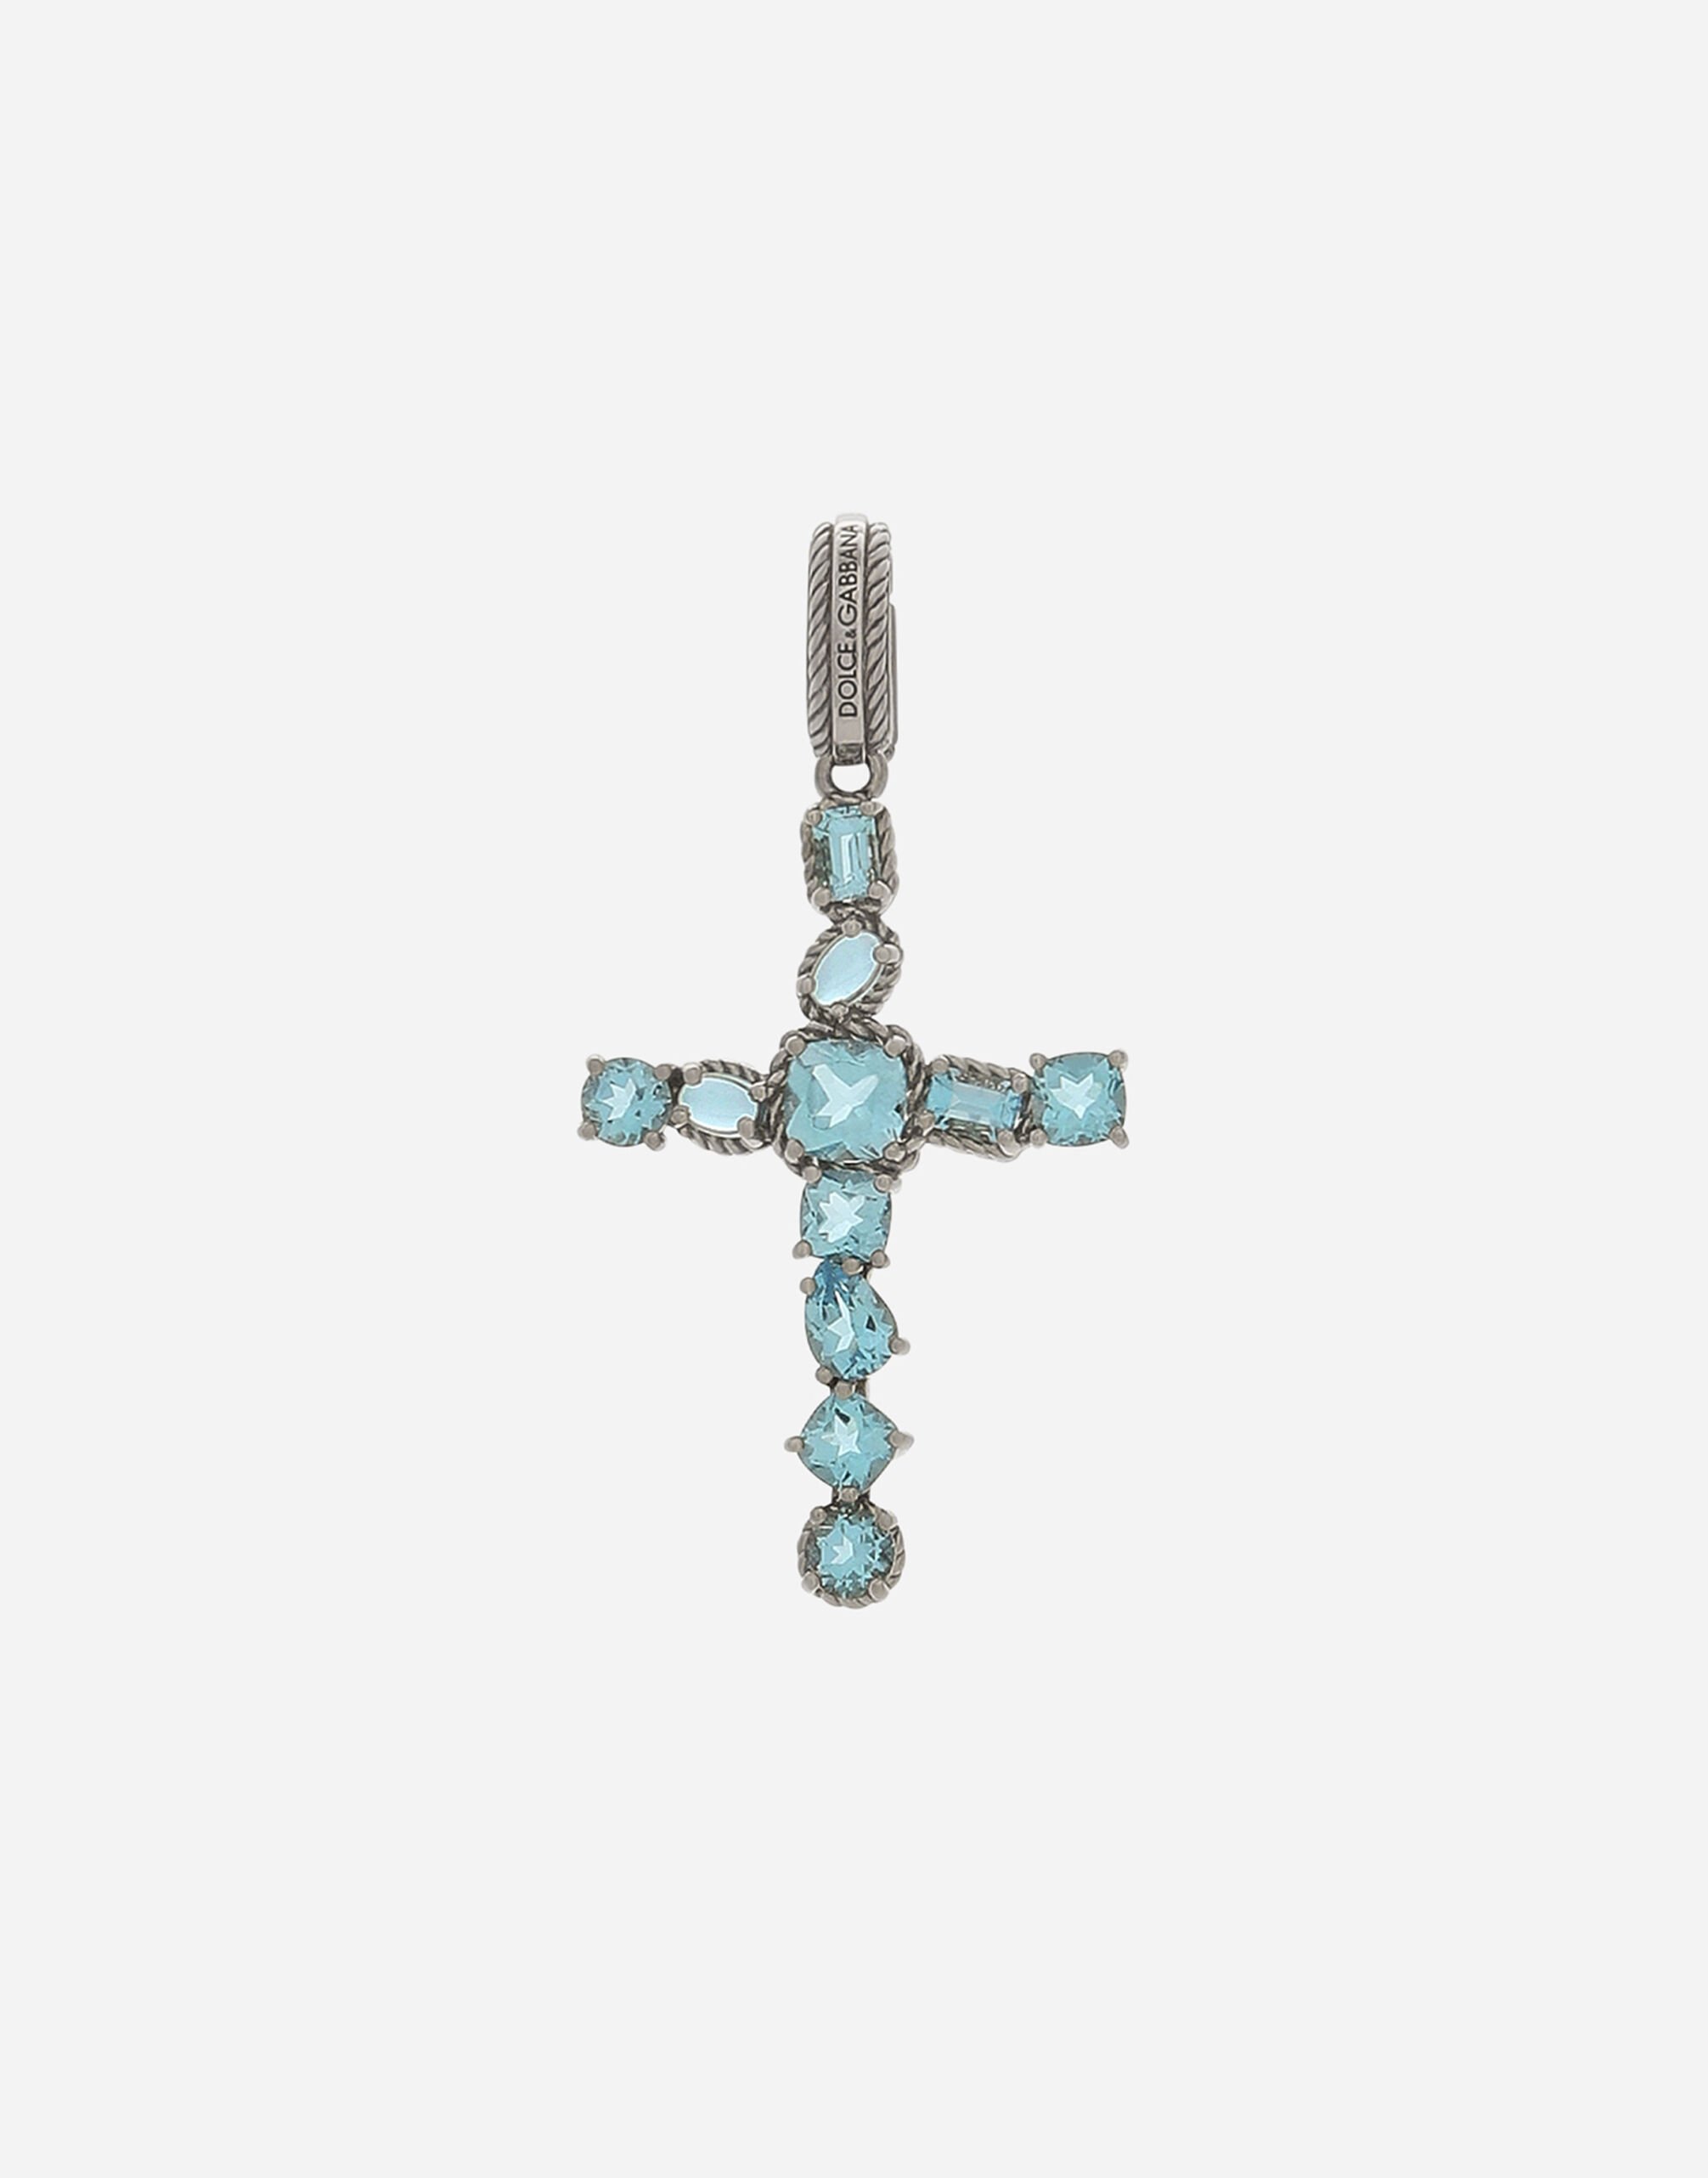 Dolce & Gabbana Anna charm in white gold 18kt with light blue topazes Rot WAQA3GWQM01